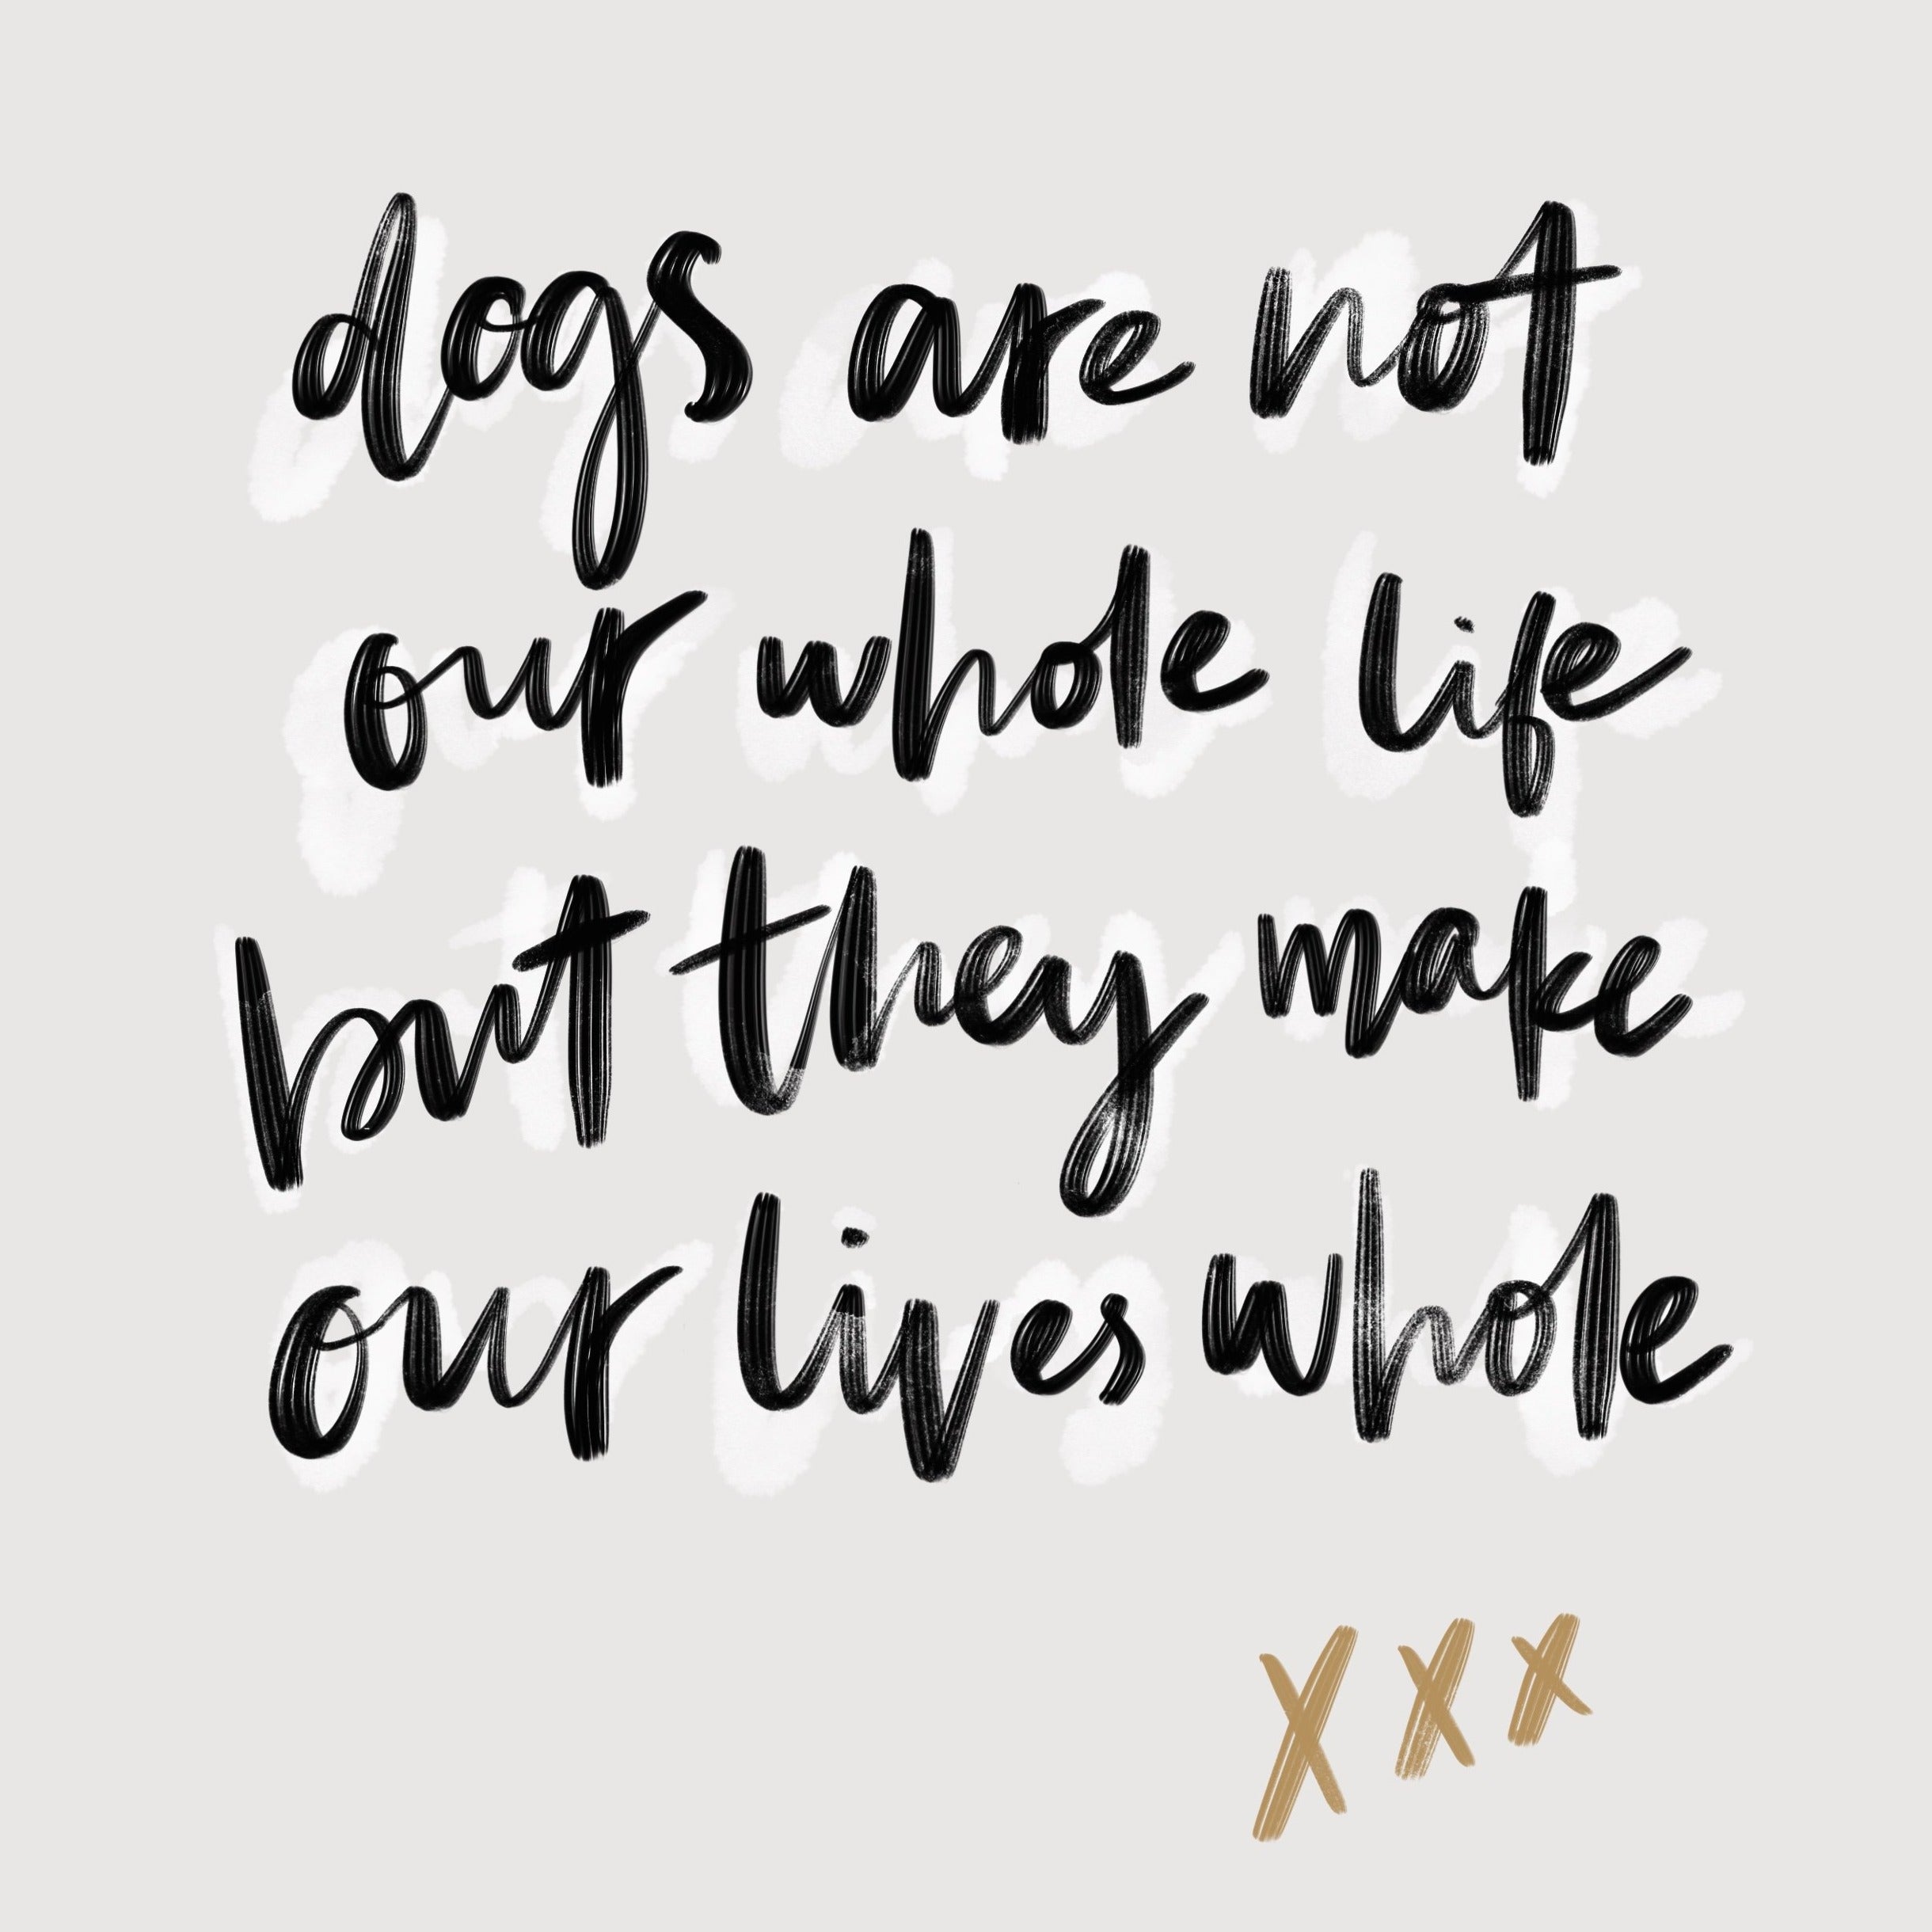 Dogs Make Our Lives Whole - Phone Wallpaper